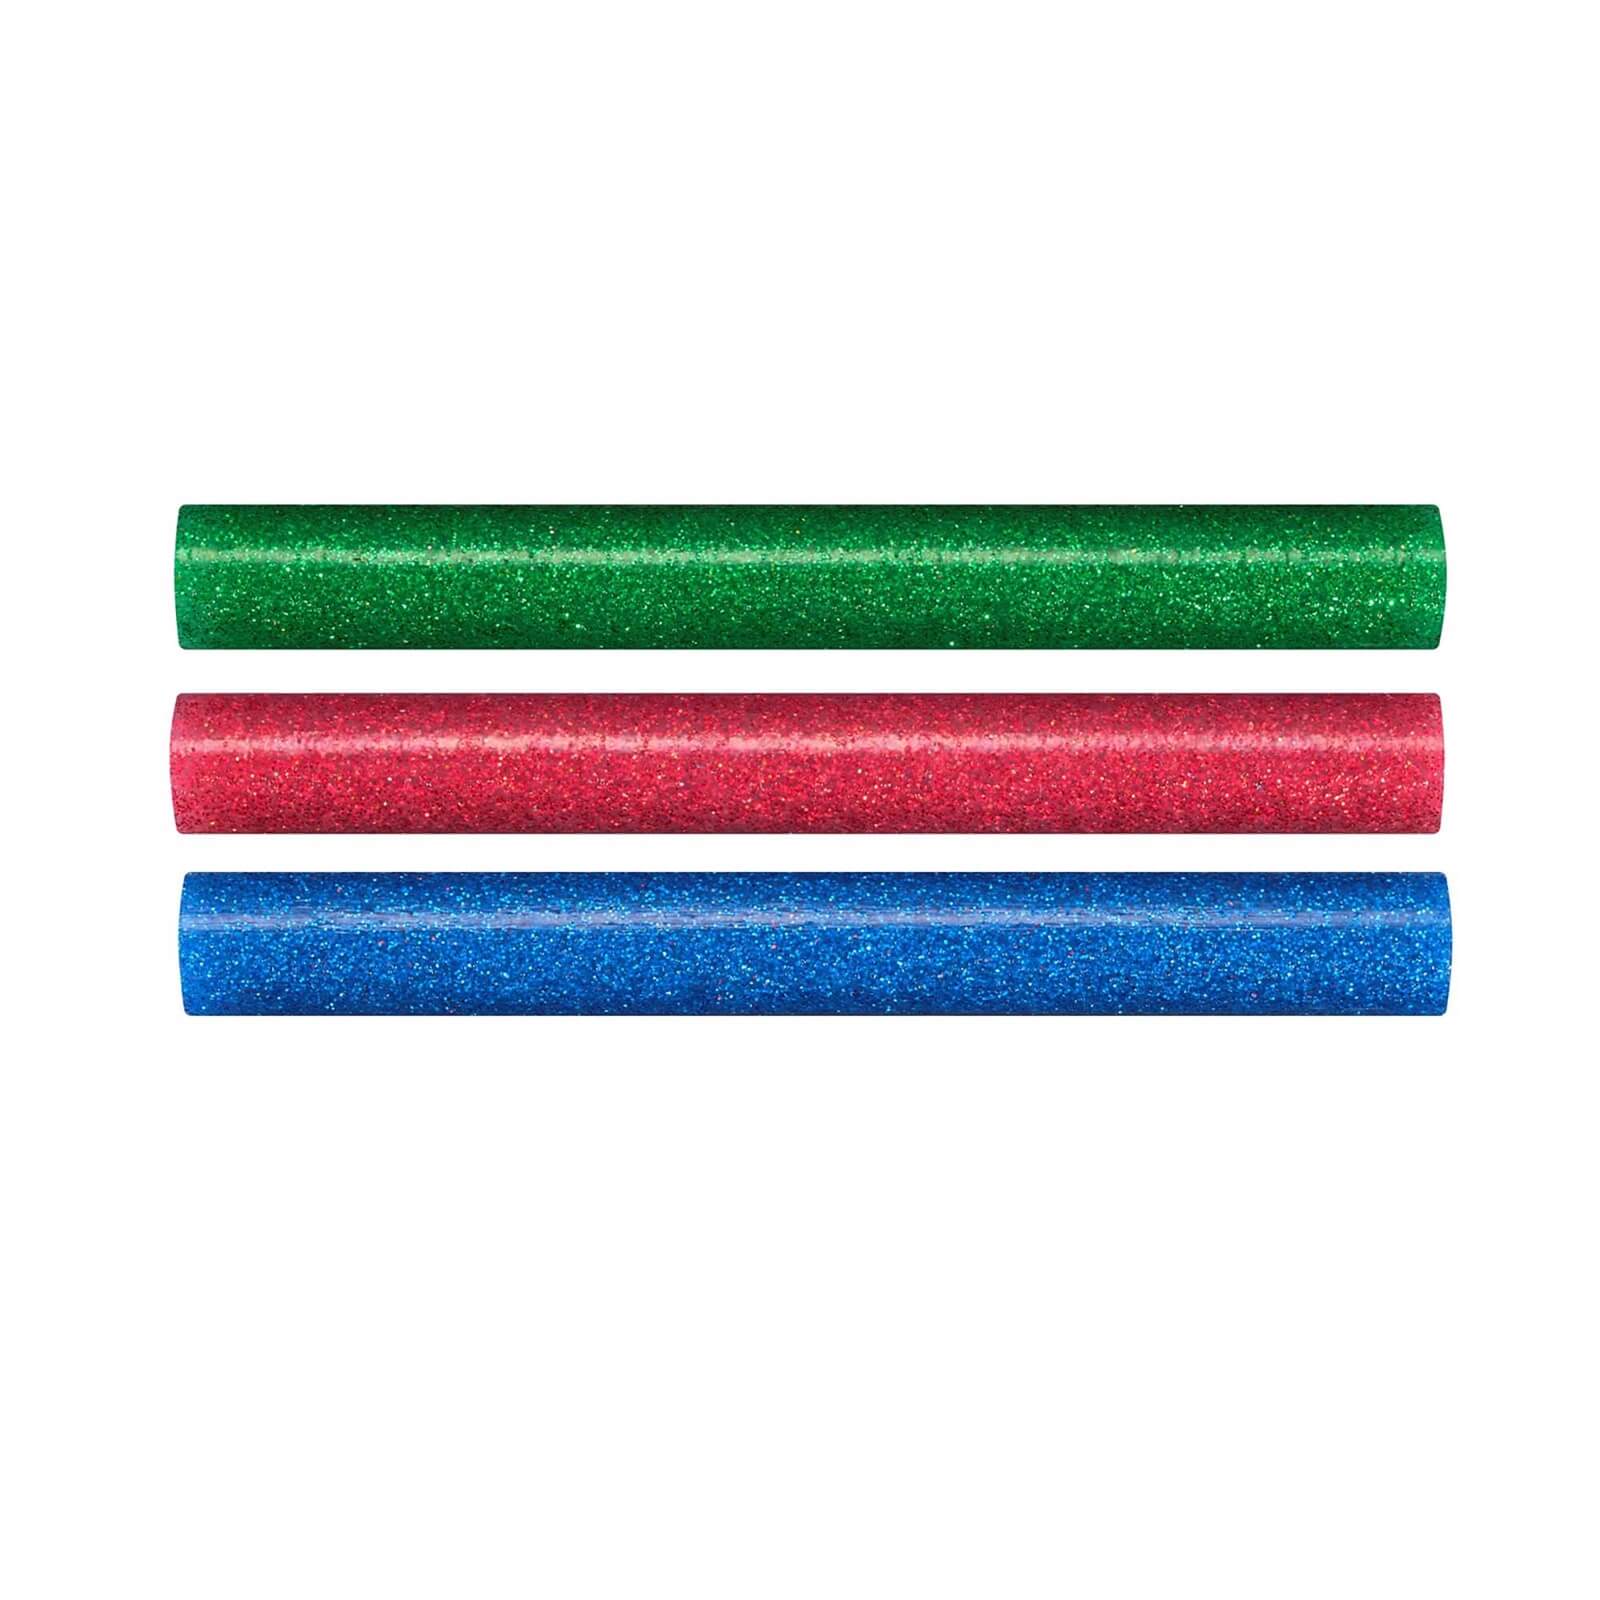 STANLEY Low Temperature Glitter Red/Green/Blue 12x101 mm Glue Sticks - Pack of 12 (STHT1-70436)